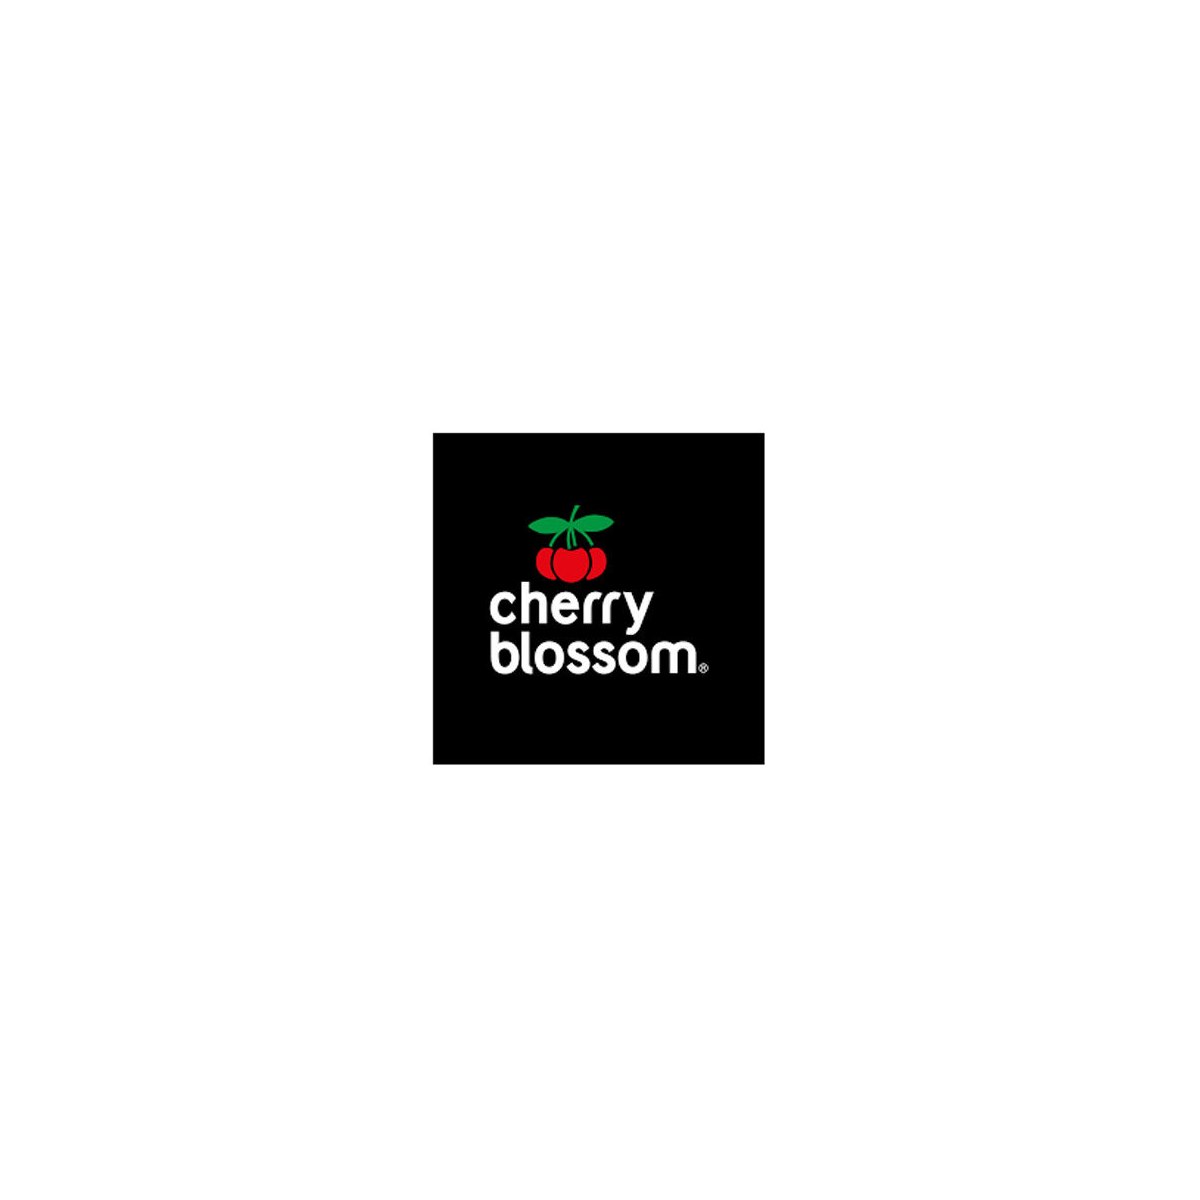 Where to Buy Cherry Blossom Products